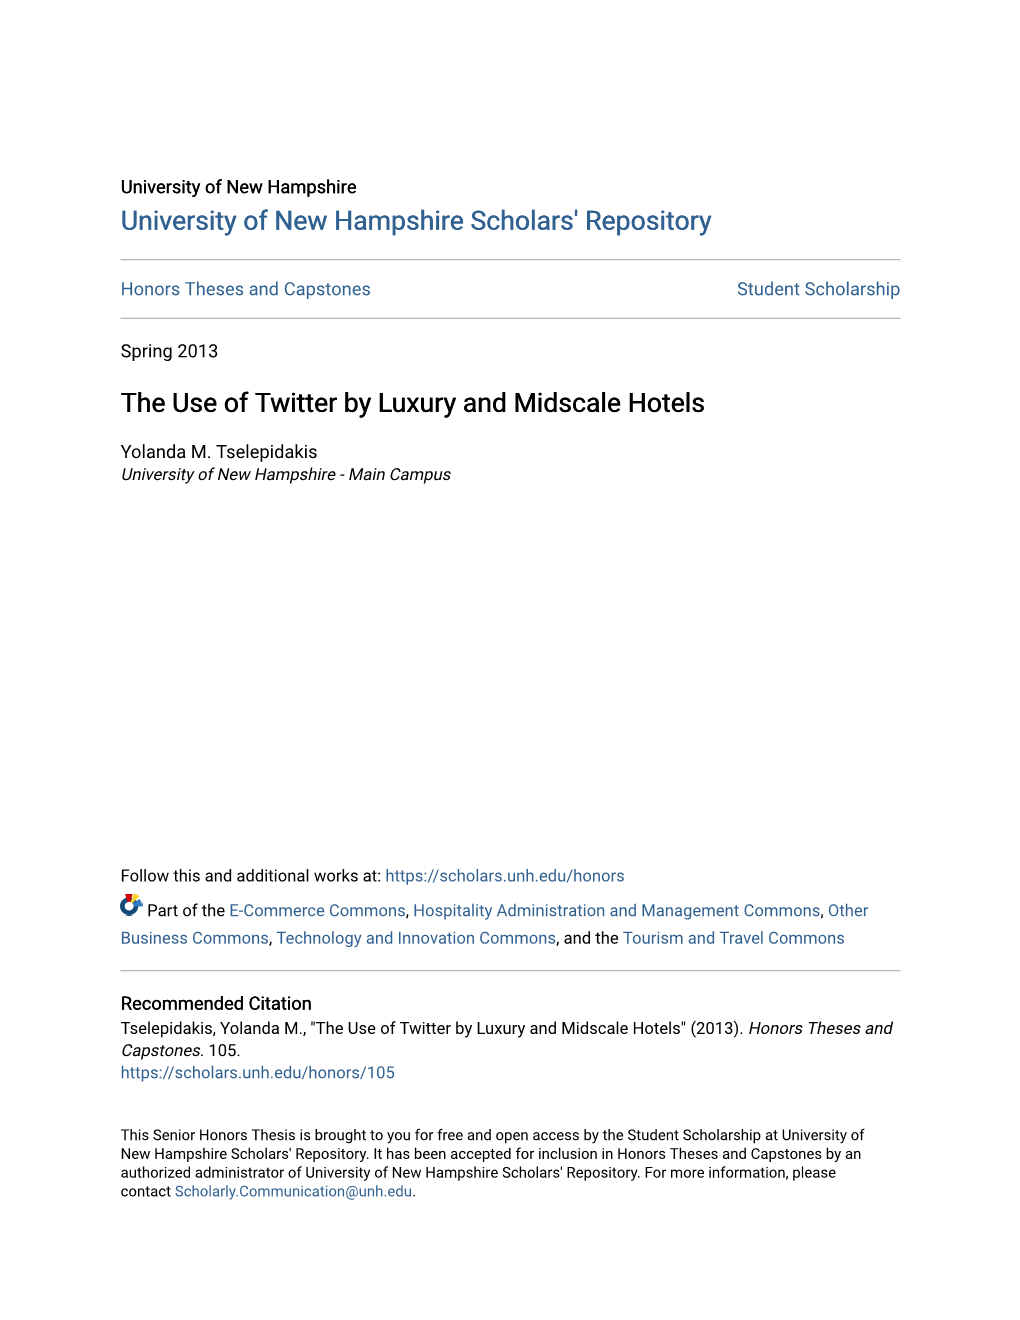 The Use of Twitter by Luxury and Midscale Hotels